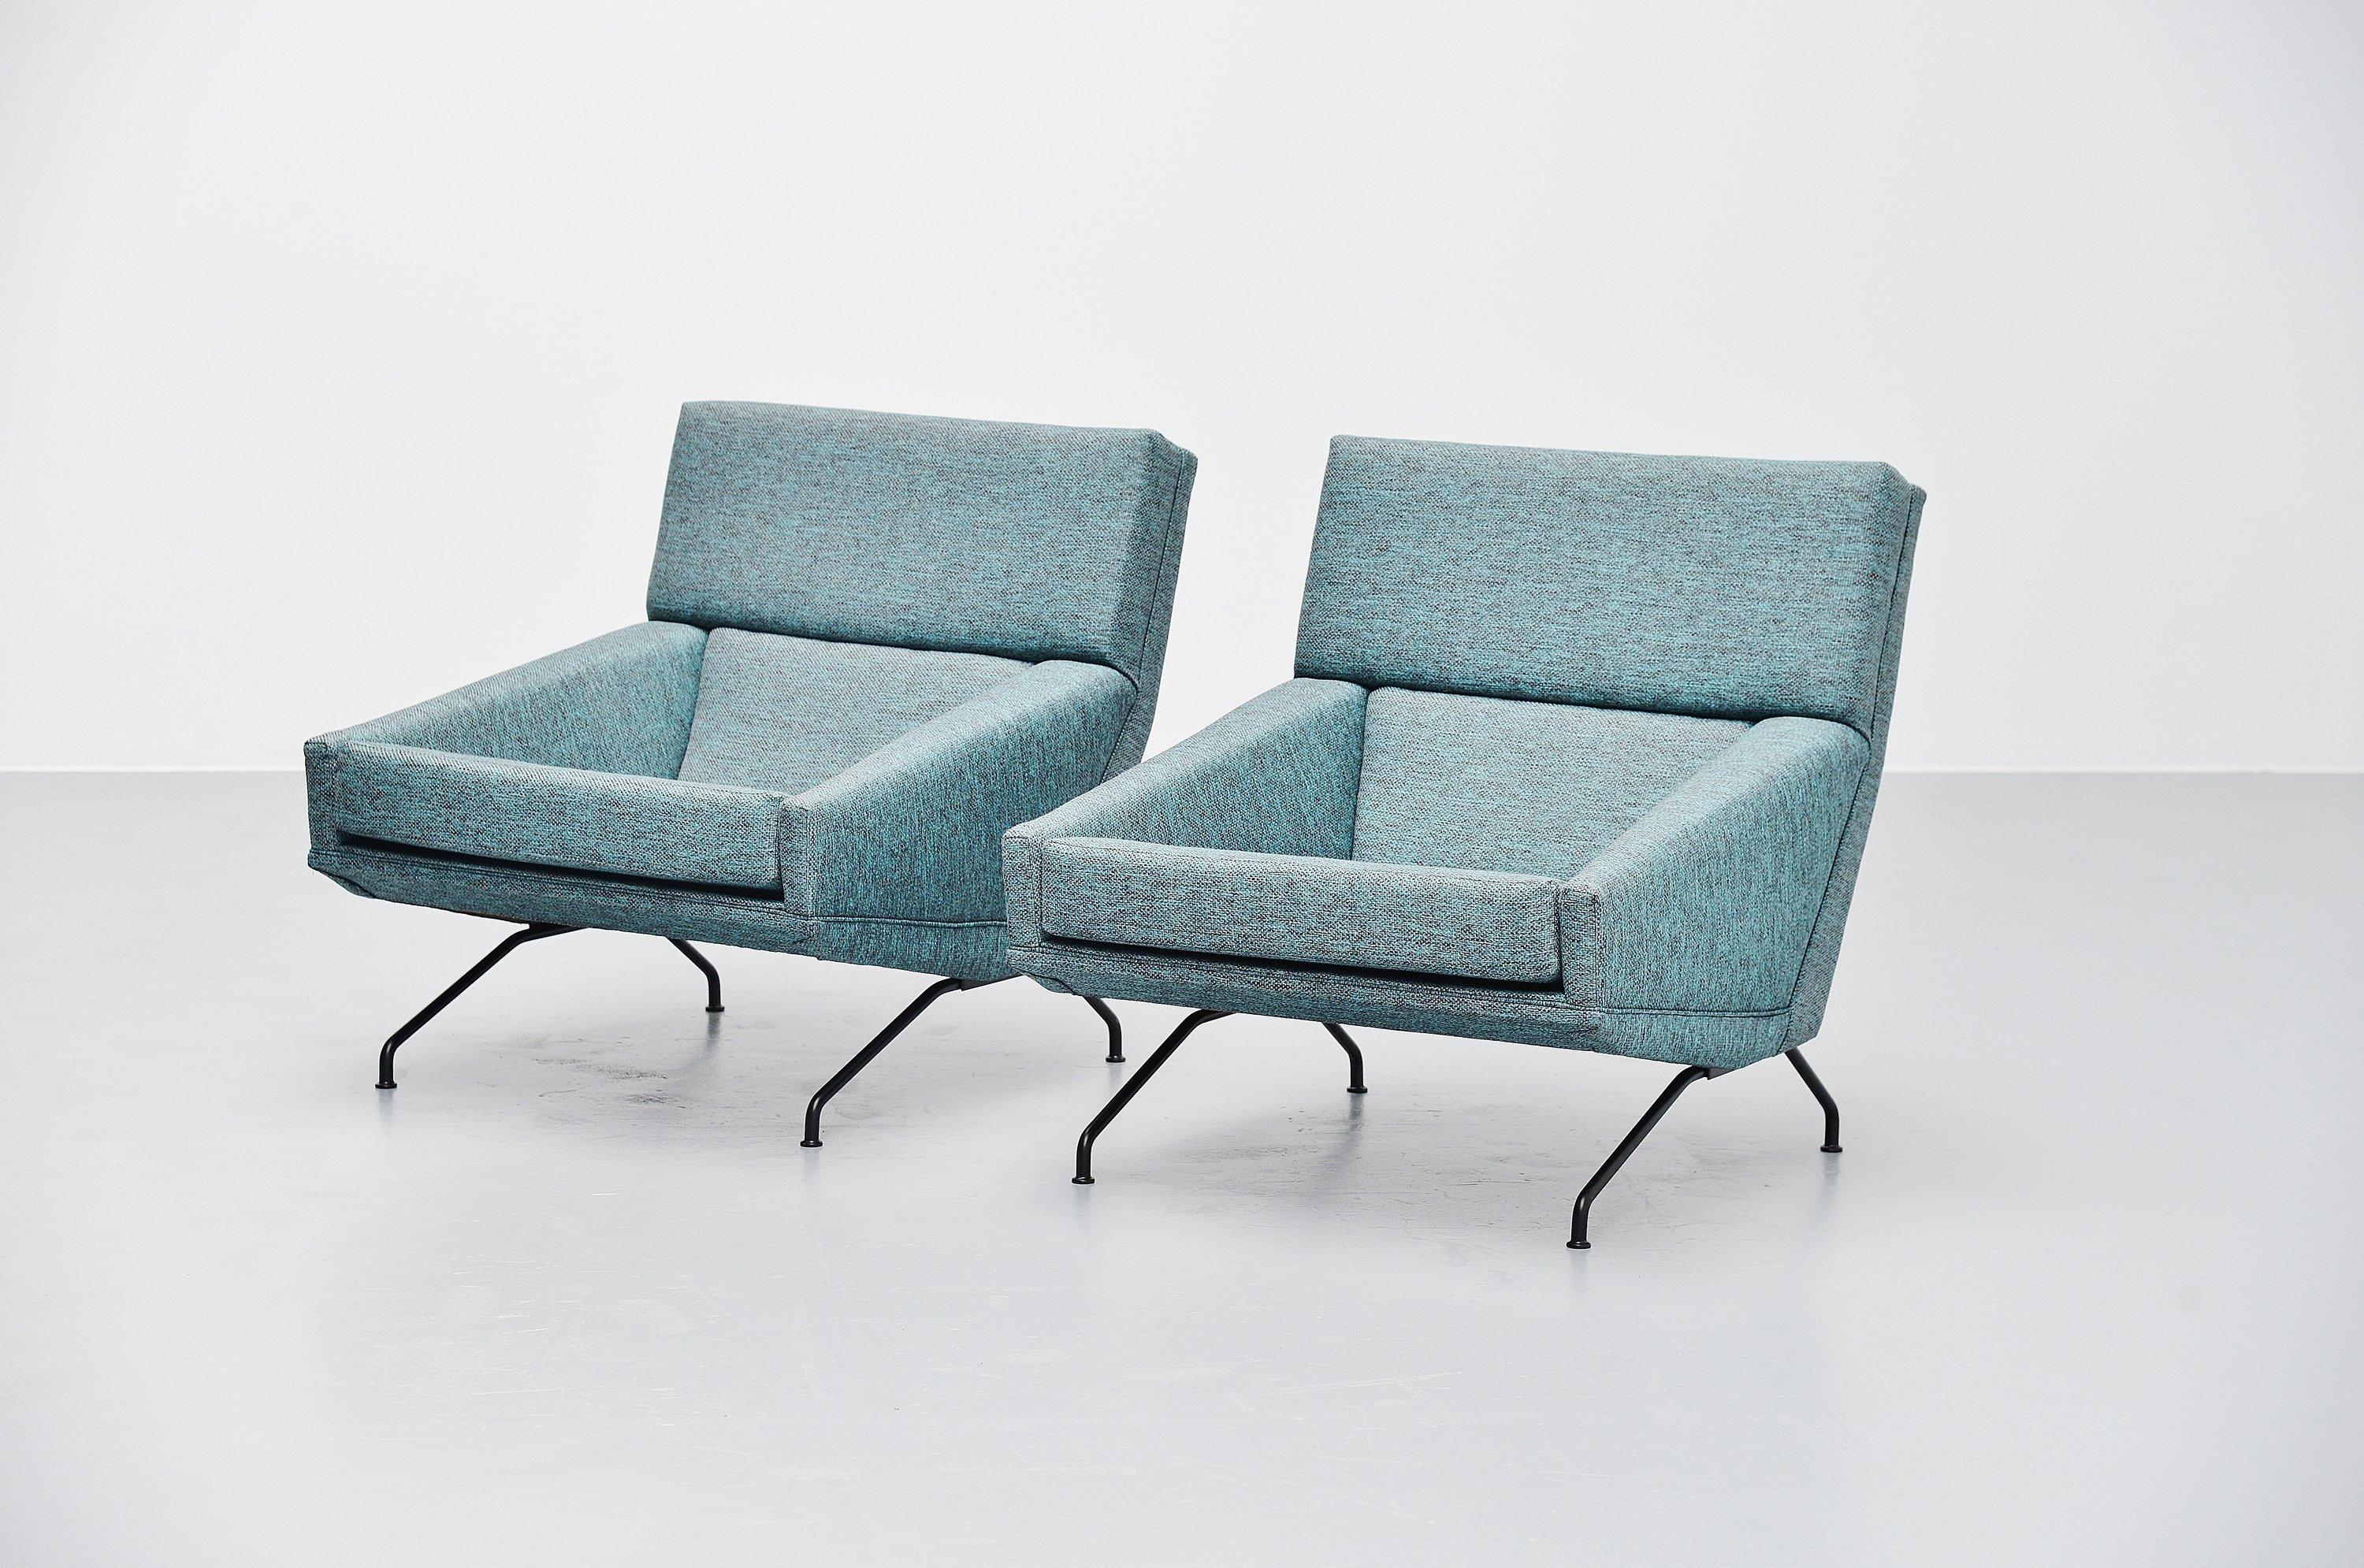 Cold-Painted Georges van Rijck Lounge Chairs Beaufort Belgium 1960